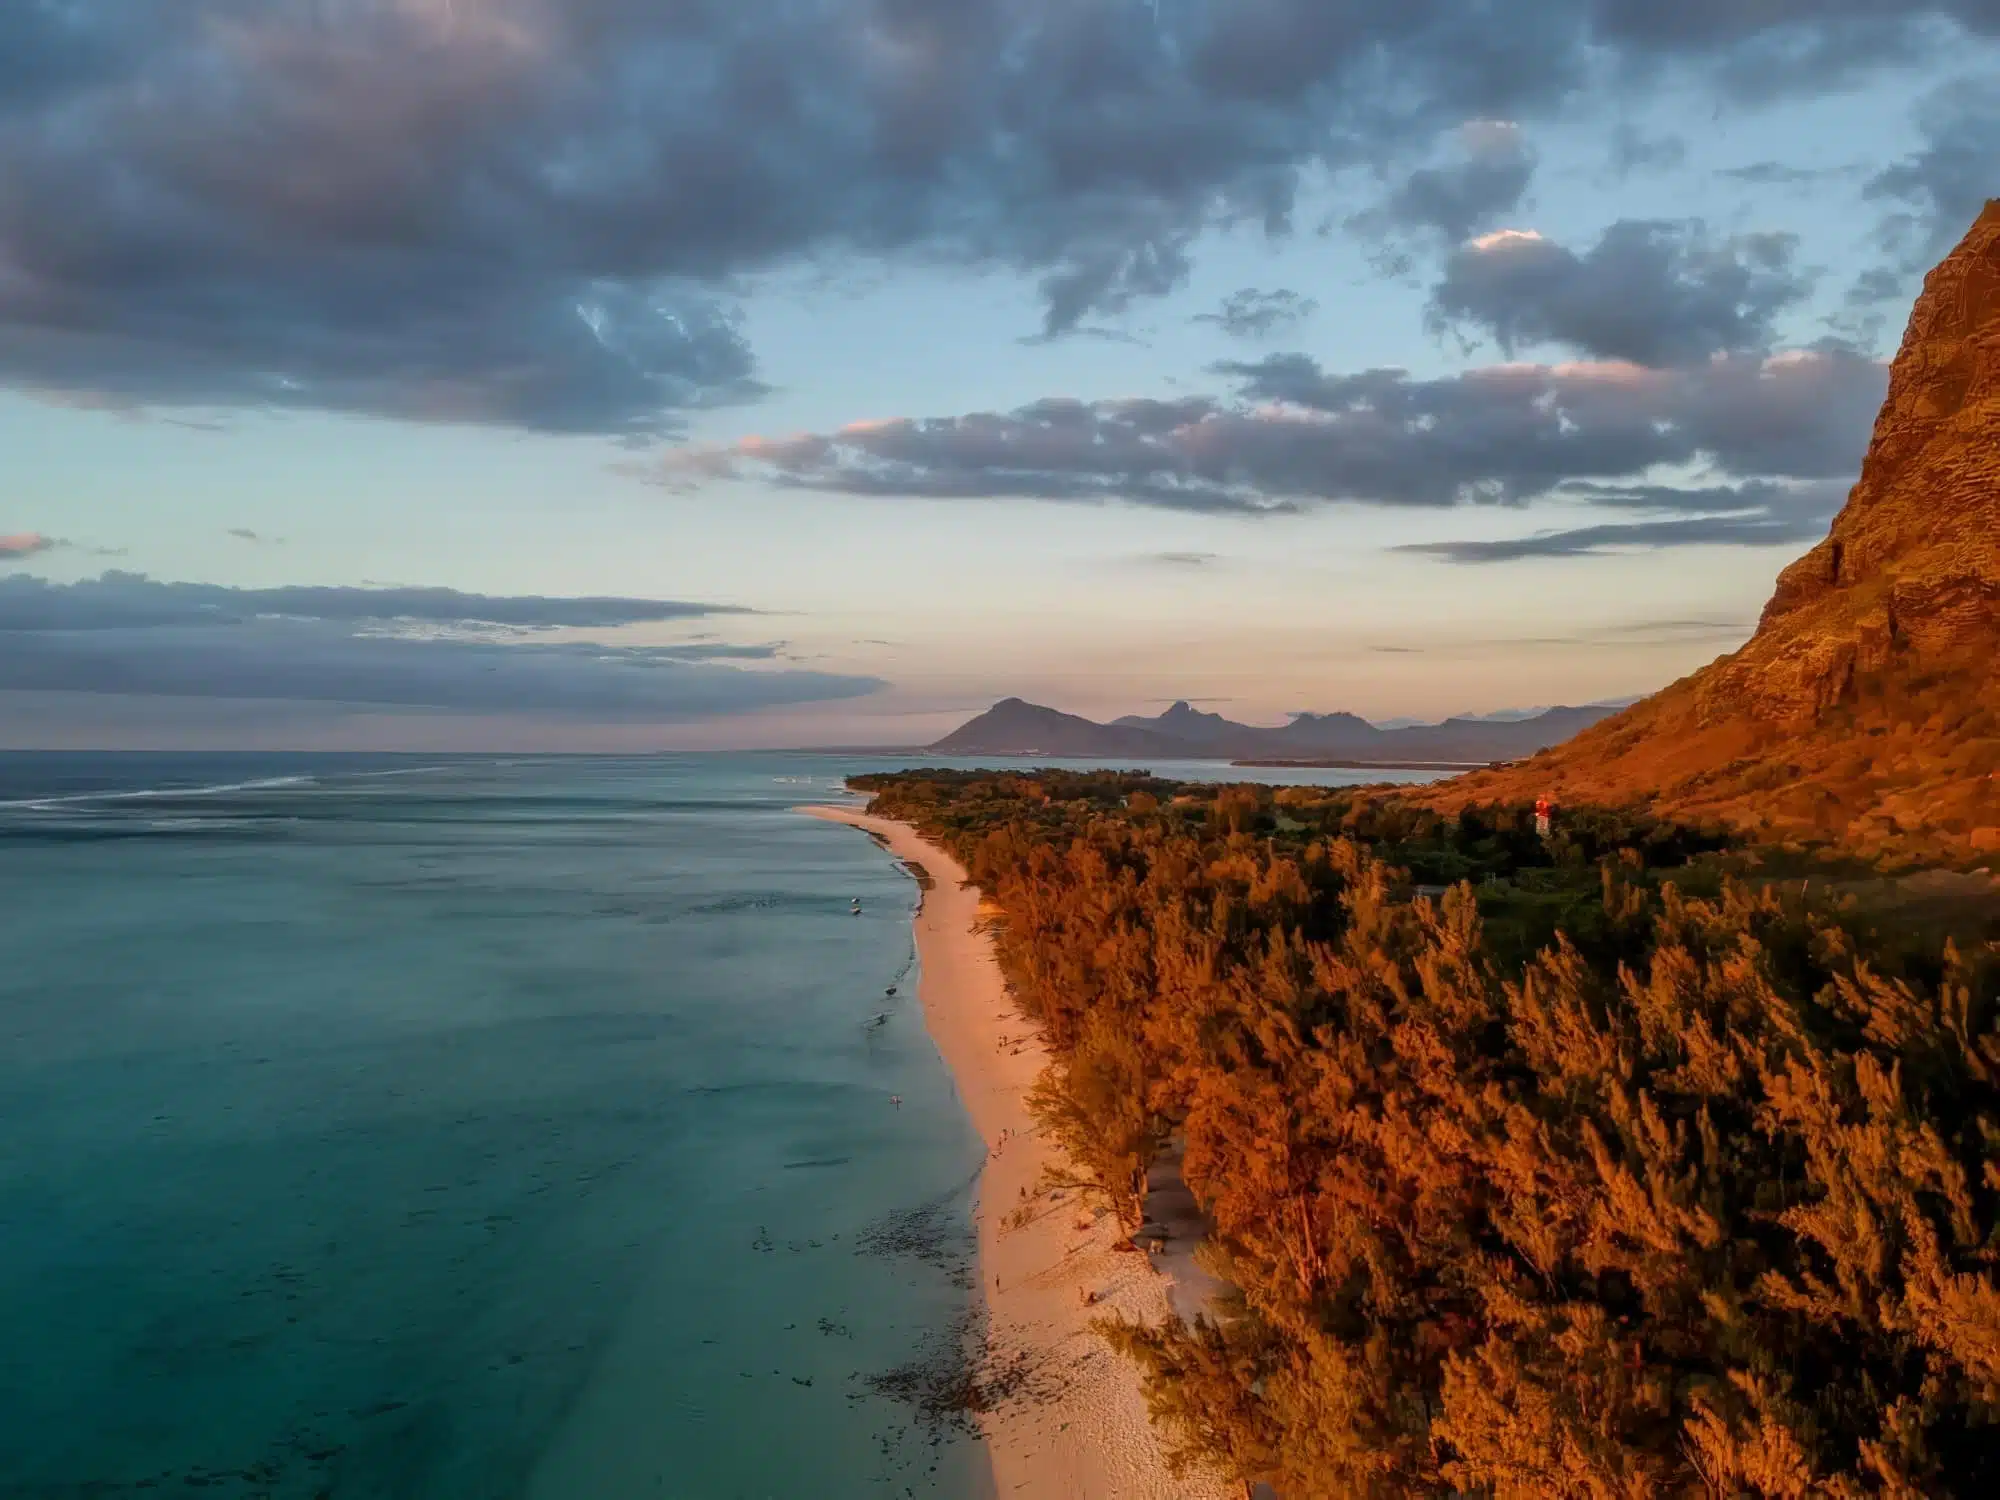 The 10 essential things to do in Mauritius